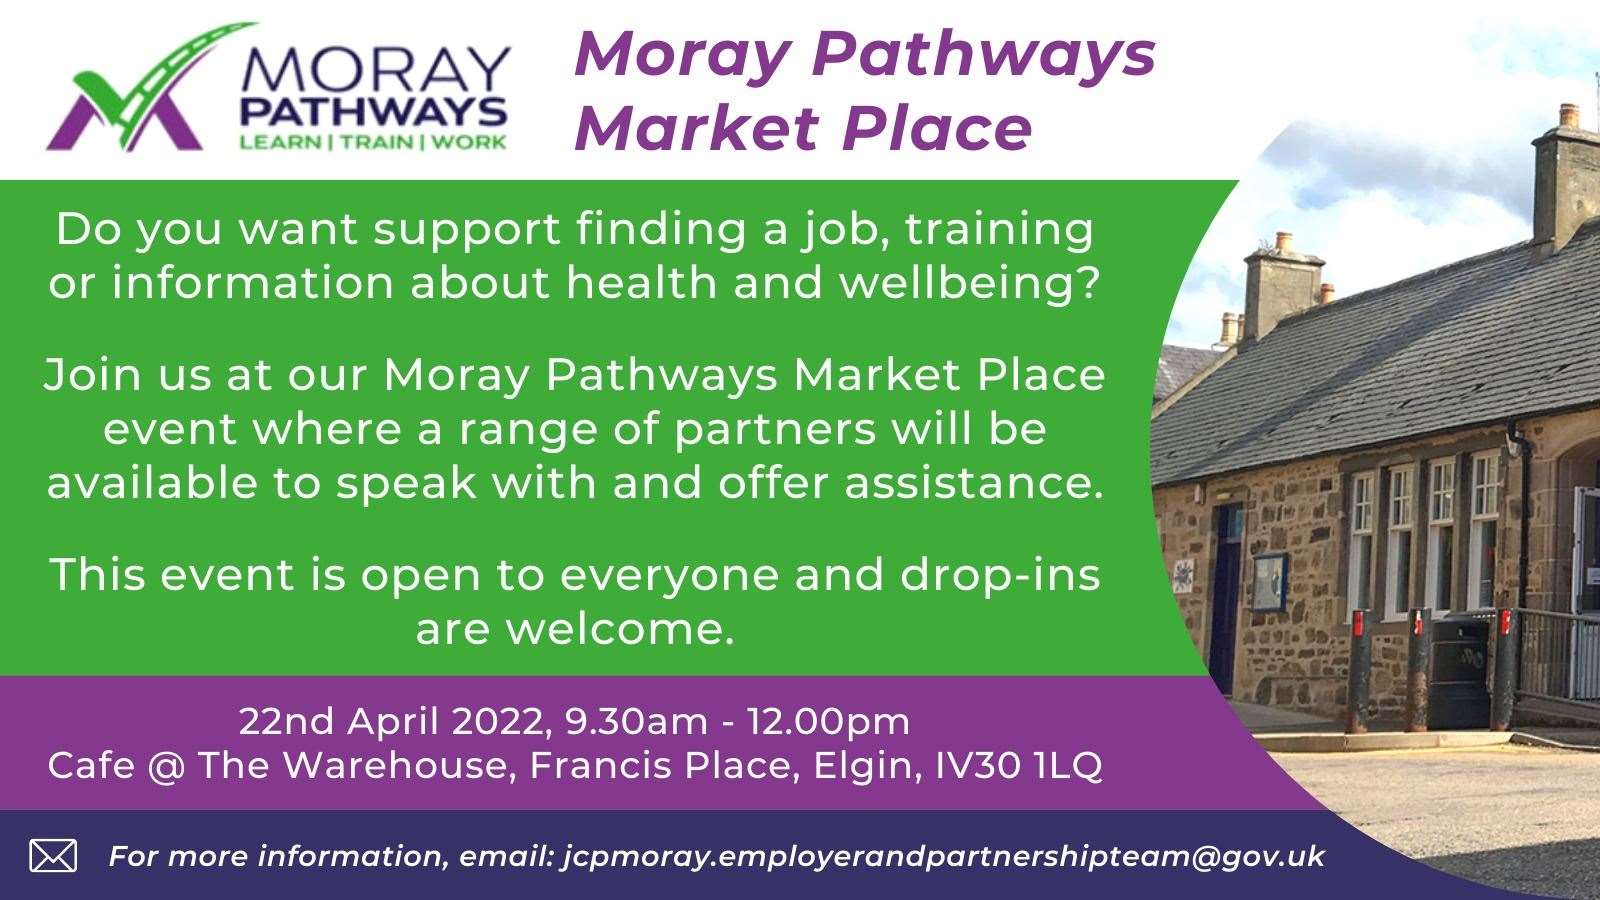 The partner agencies attending the forthcoming Moray Pathways Marketplace open day have been confirmed.